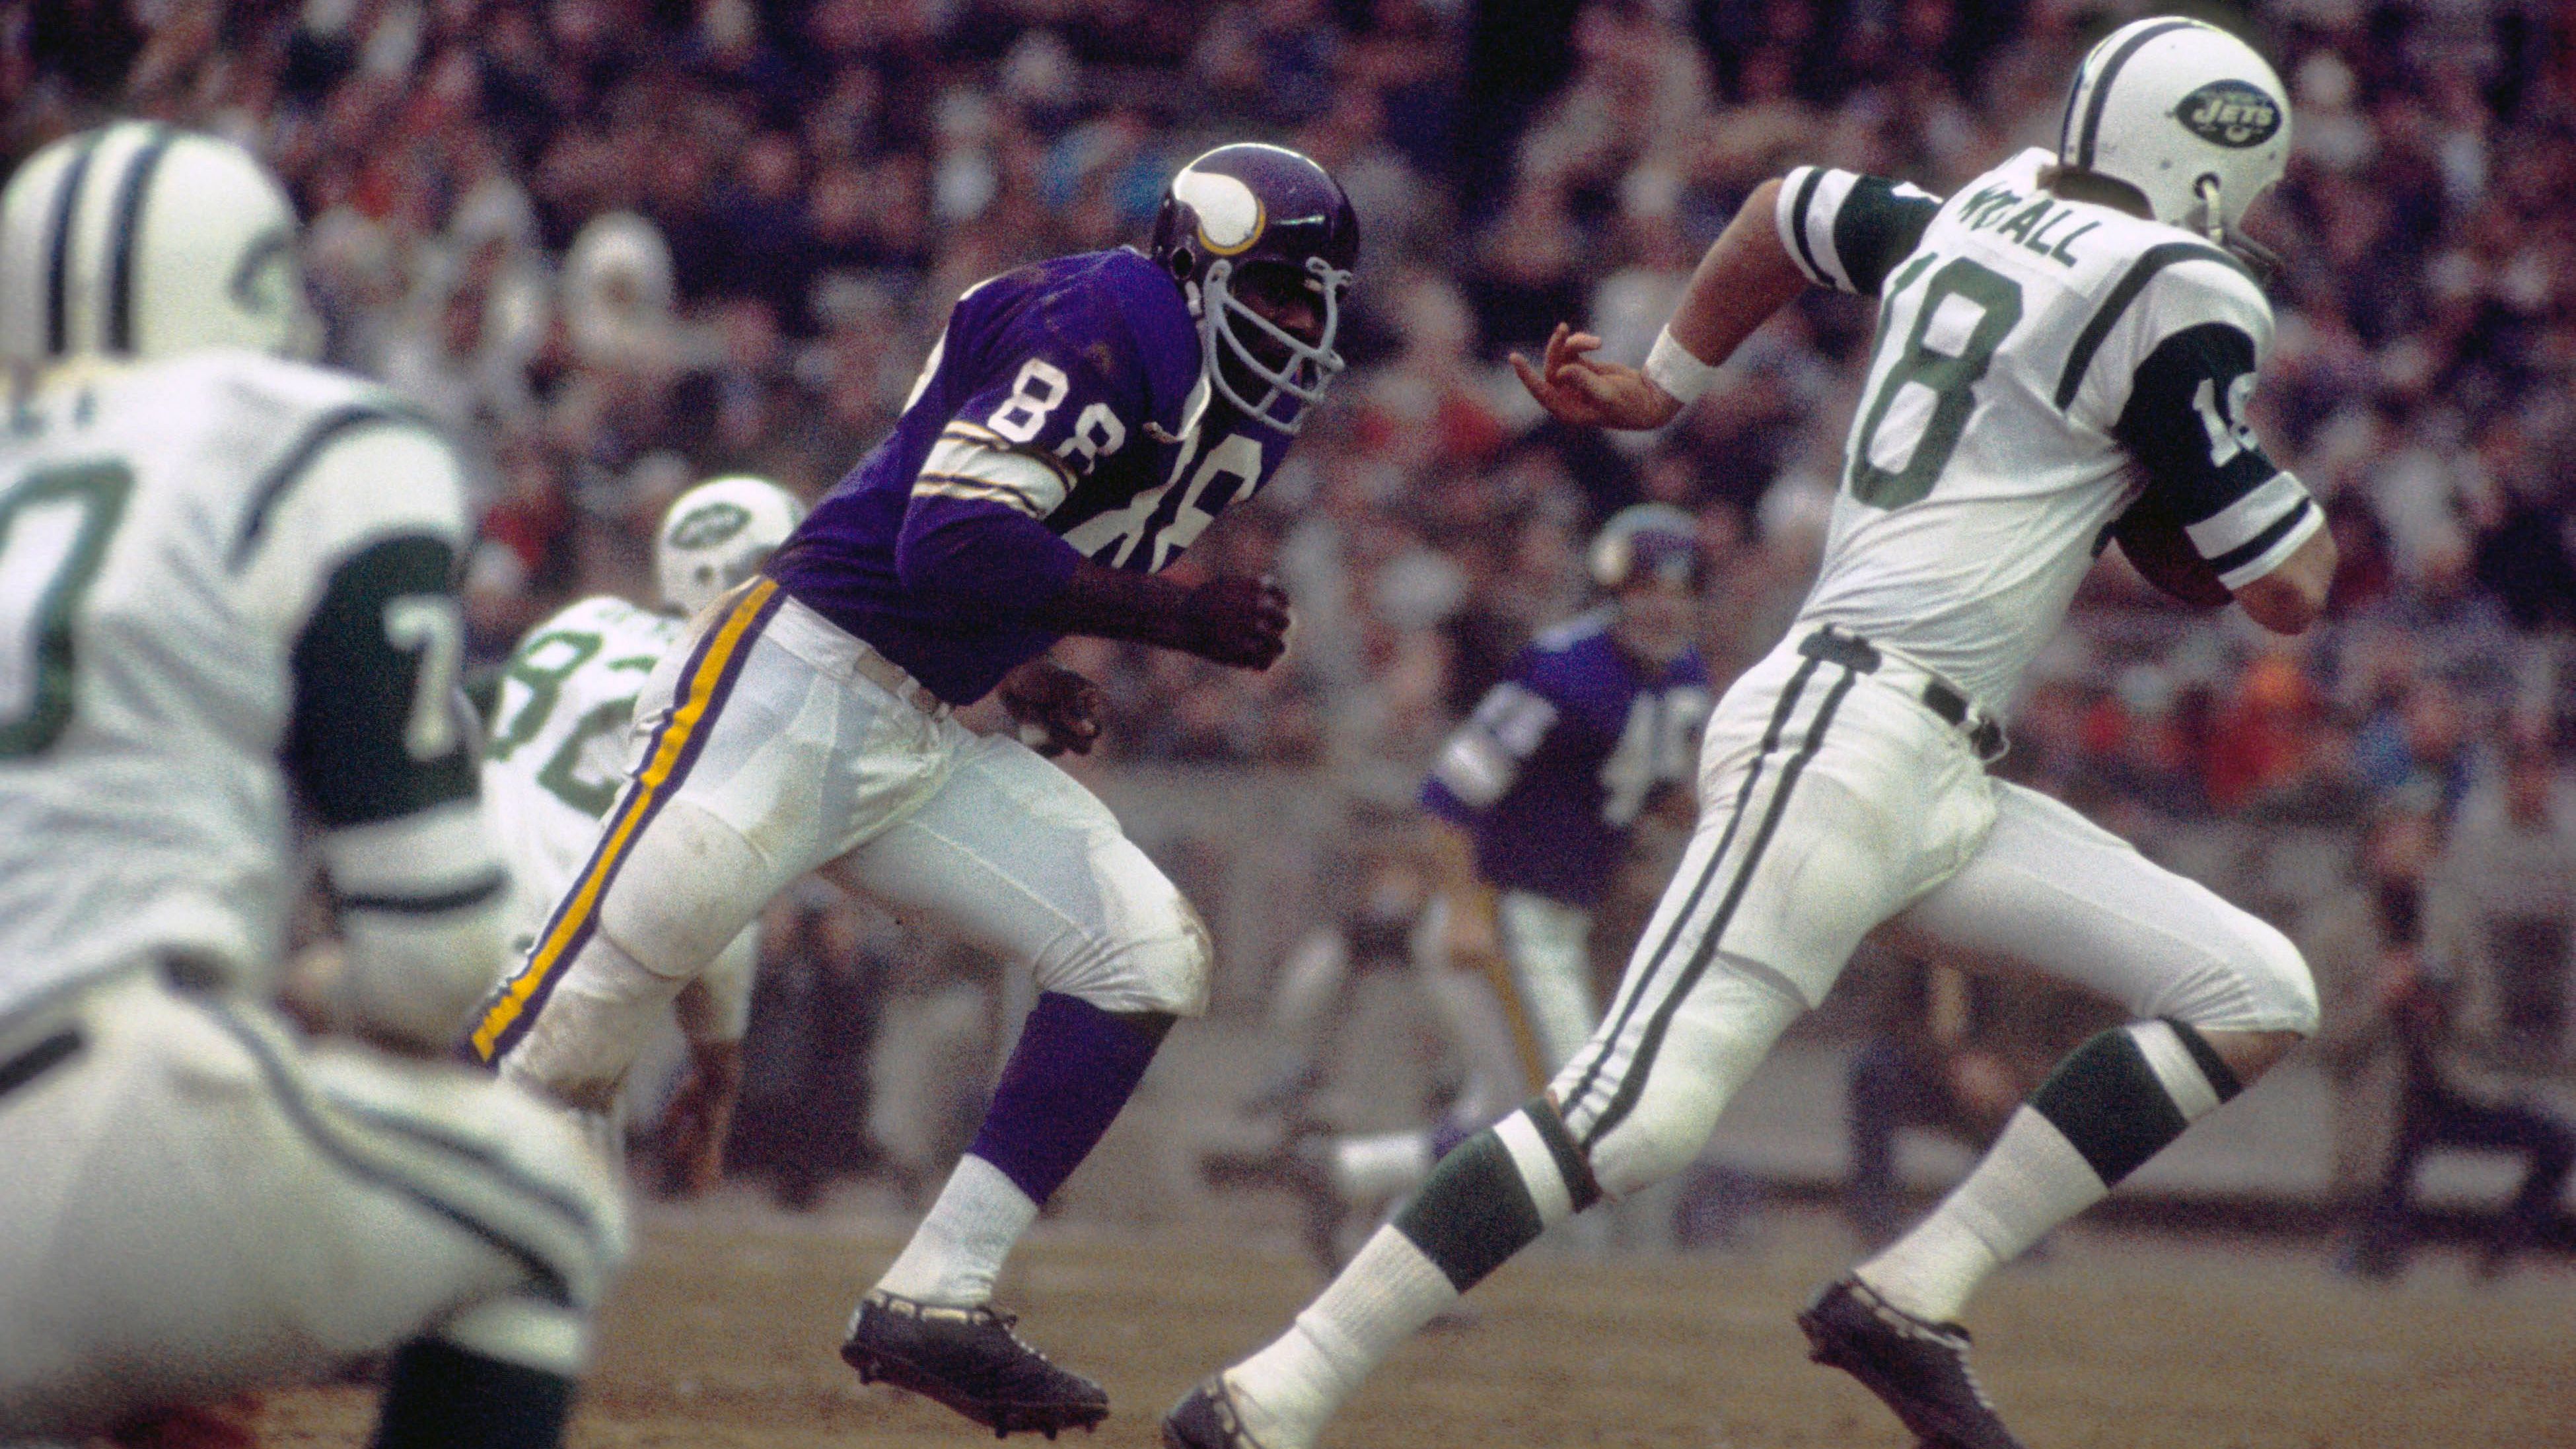 <strong>88: Alan Page<br></strong>Teams: Minnesota Vikings, Chicago Bears<br>Position: Defensive Tackle<br>Erfolge: Pro Football Hall of Famer, NFL-Champion 1969, NFL MVP 1971, zweimaliger NFL Defensive Player of the Year, fünfmaliger First Team All-Pro, neunmaliger Pro Bowler<br>Honorable Mentions: Travis Kelce, Willie Davis